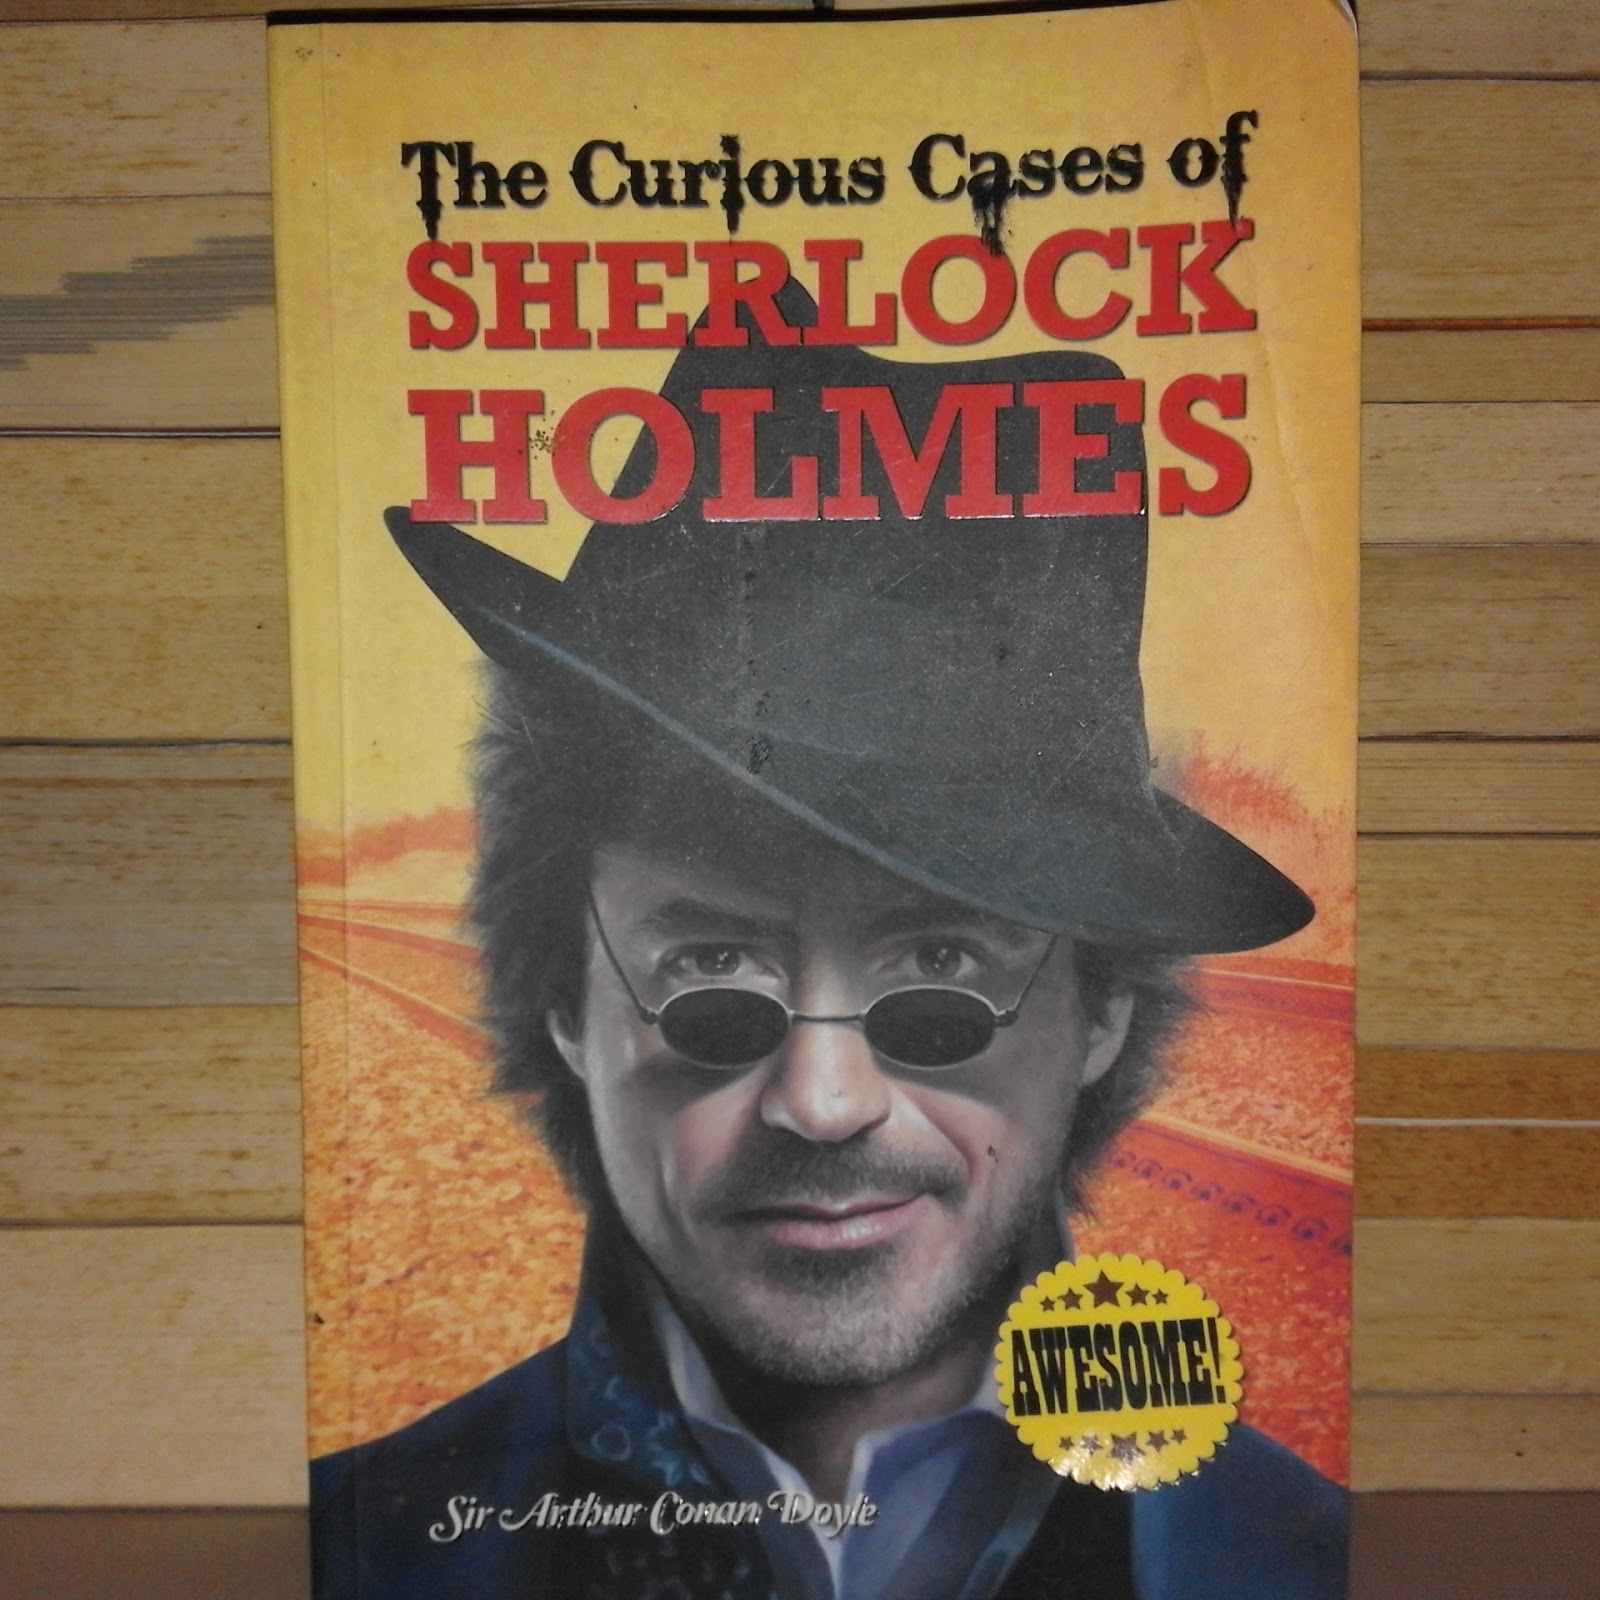 The curious cases of Sherlock Holmes